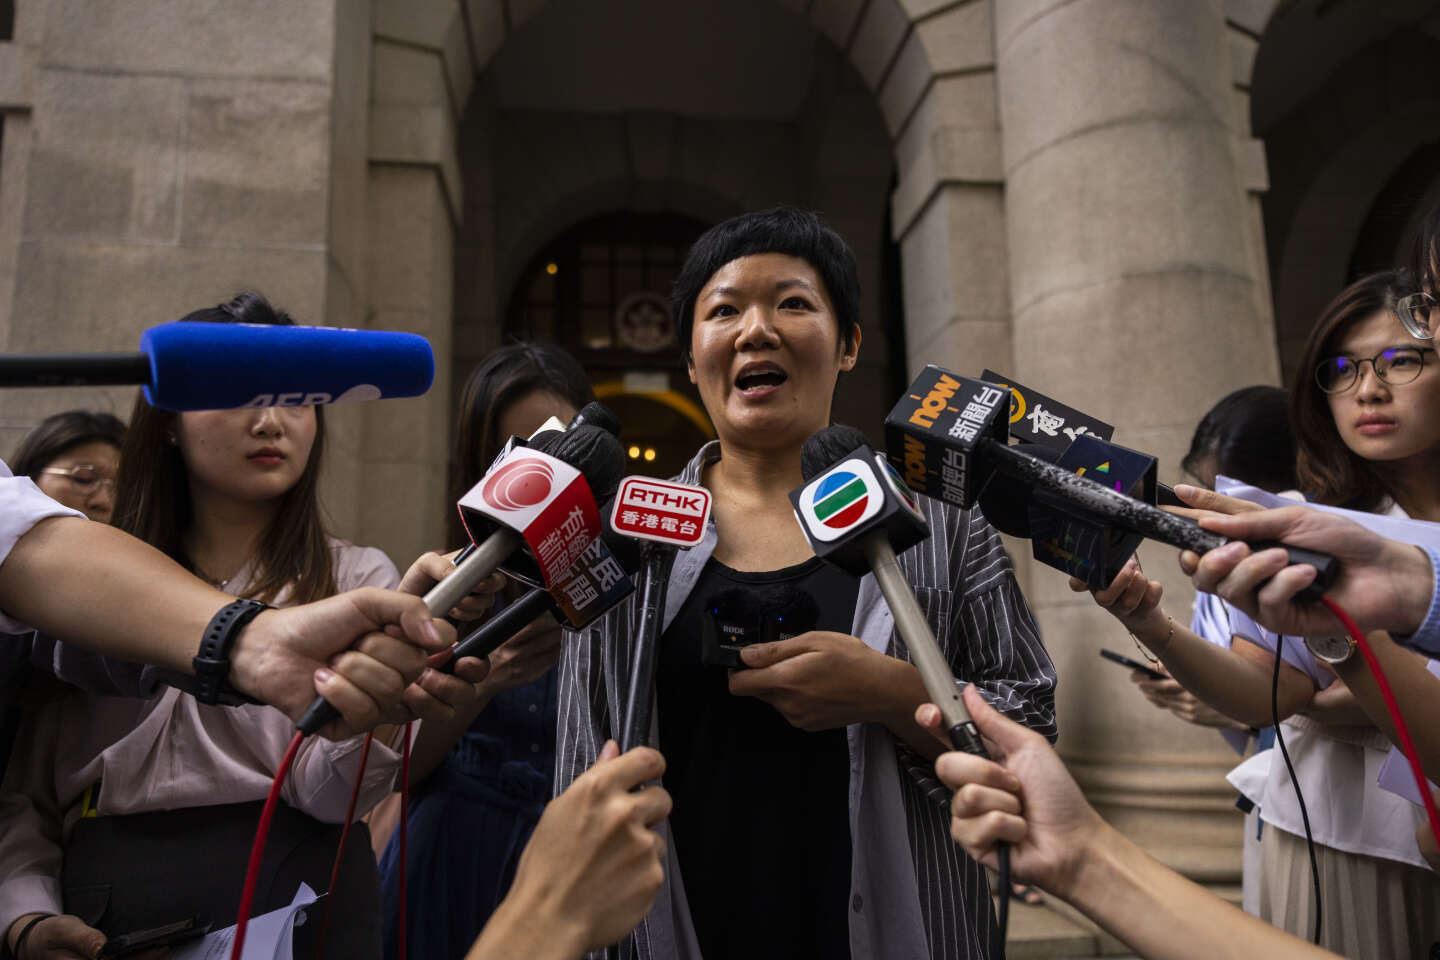 The Hong Kong High Court overturns the investigative journalist’s conviction